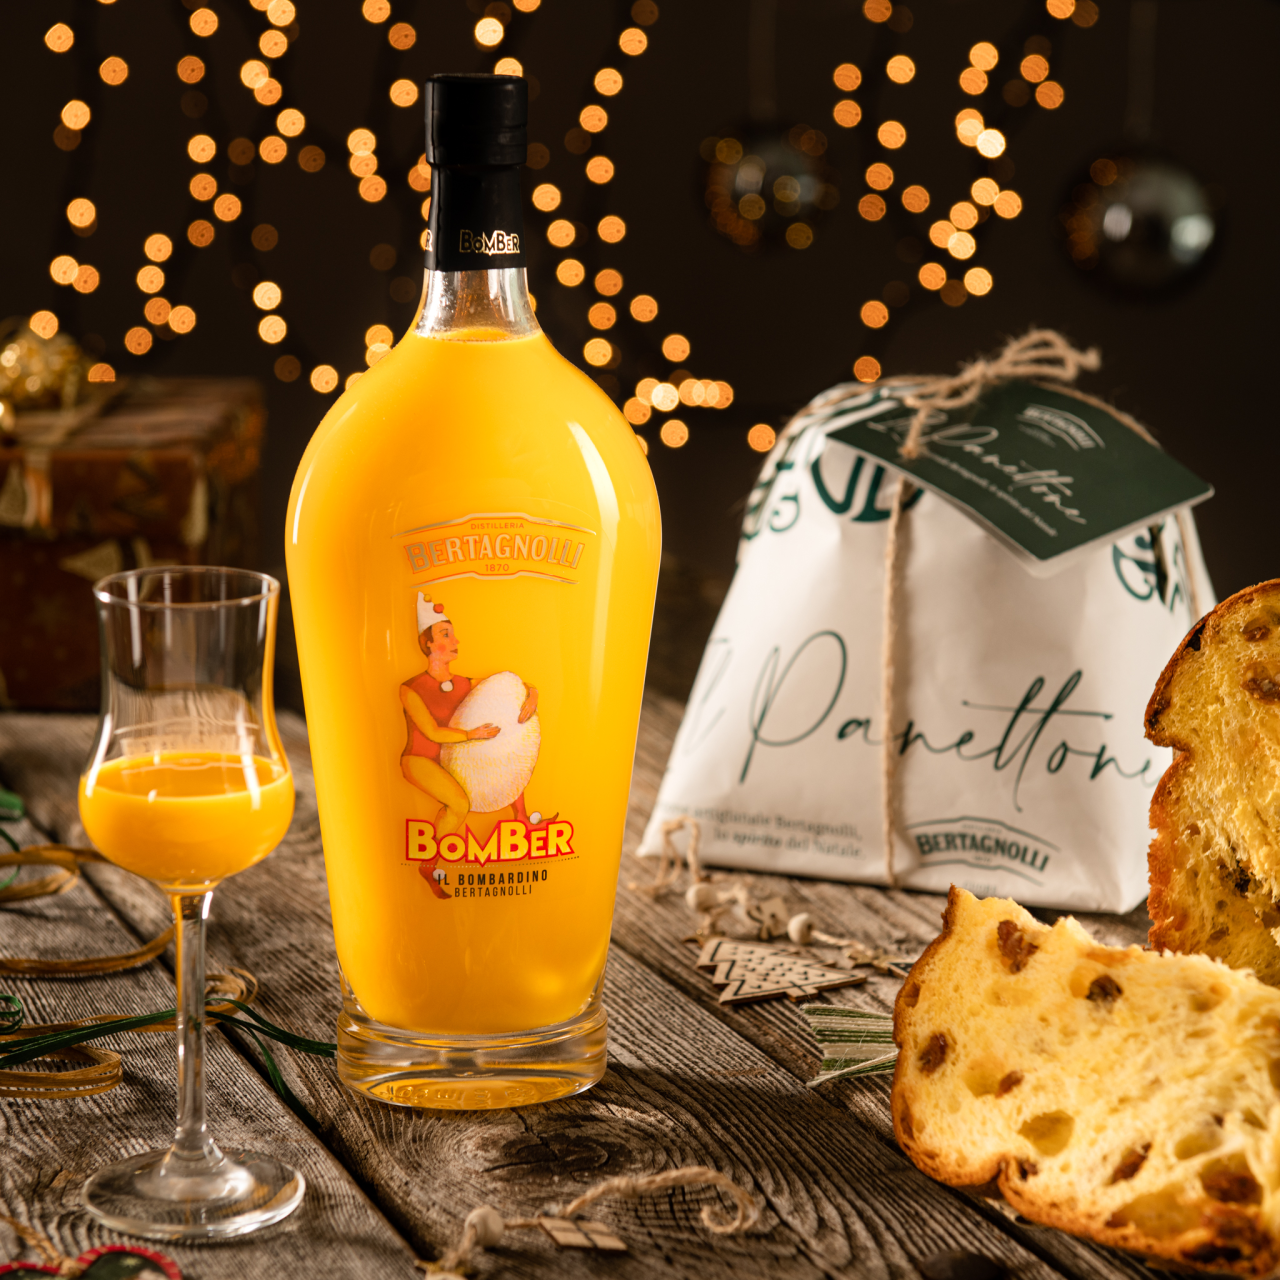 Artisanal Panettone with raisins and cream made with Grappa Moscato (750g)